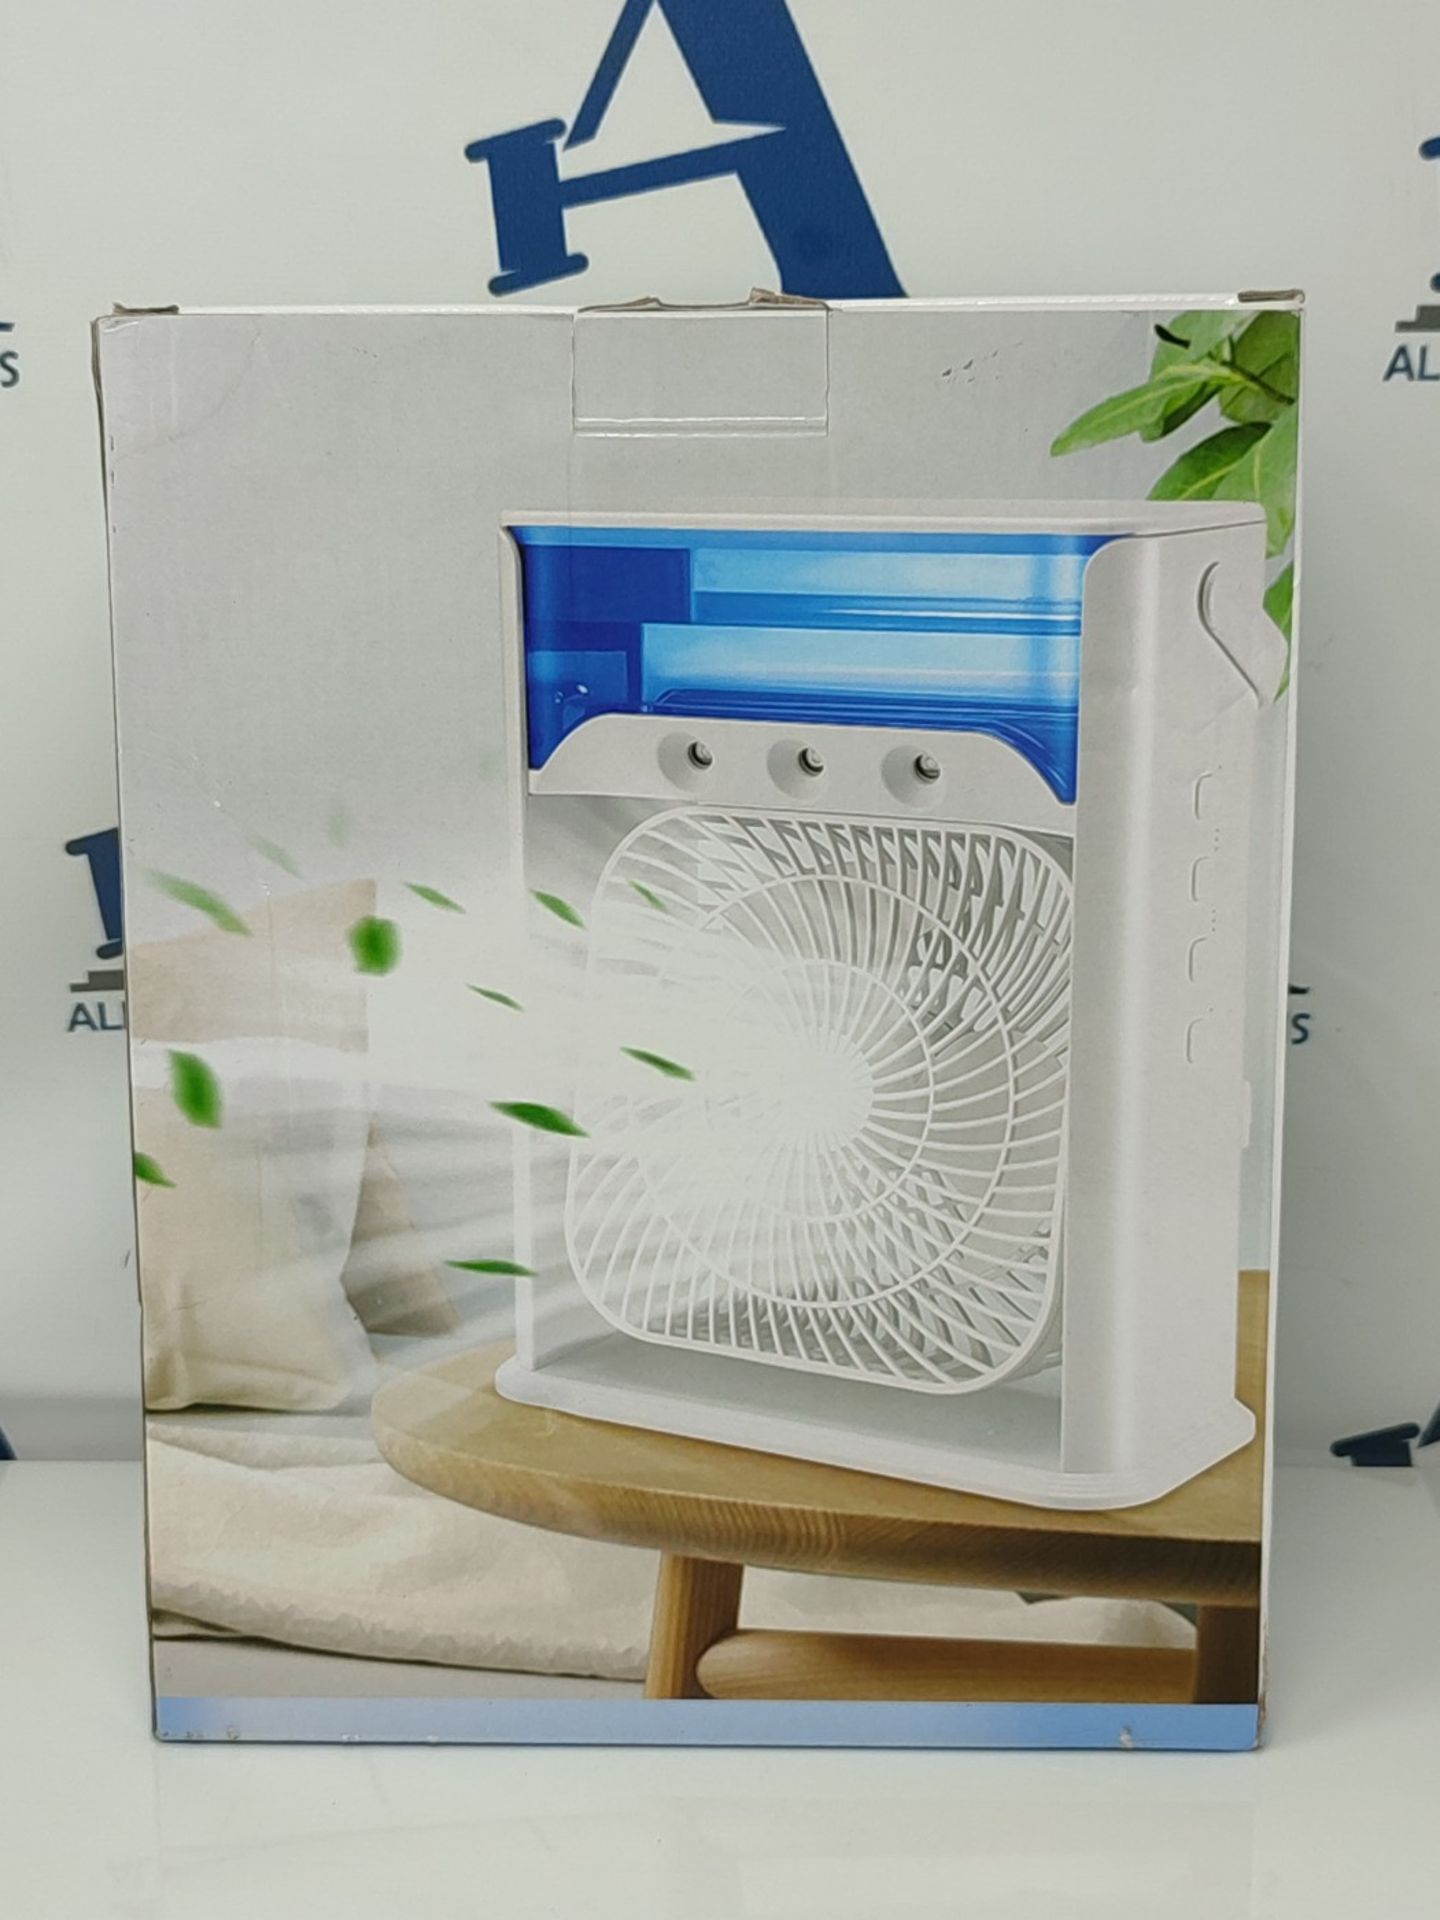 Portable Air Cooler 4-In-1 Mini Mobile Air Conditioner Fan, Air Cooling Fan and Humidi - Image 2 of 3